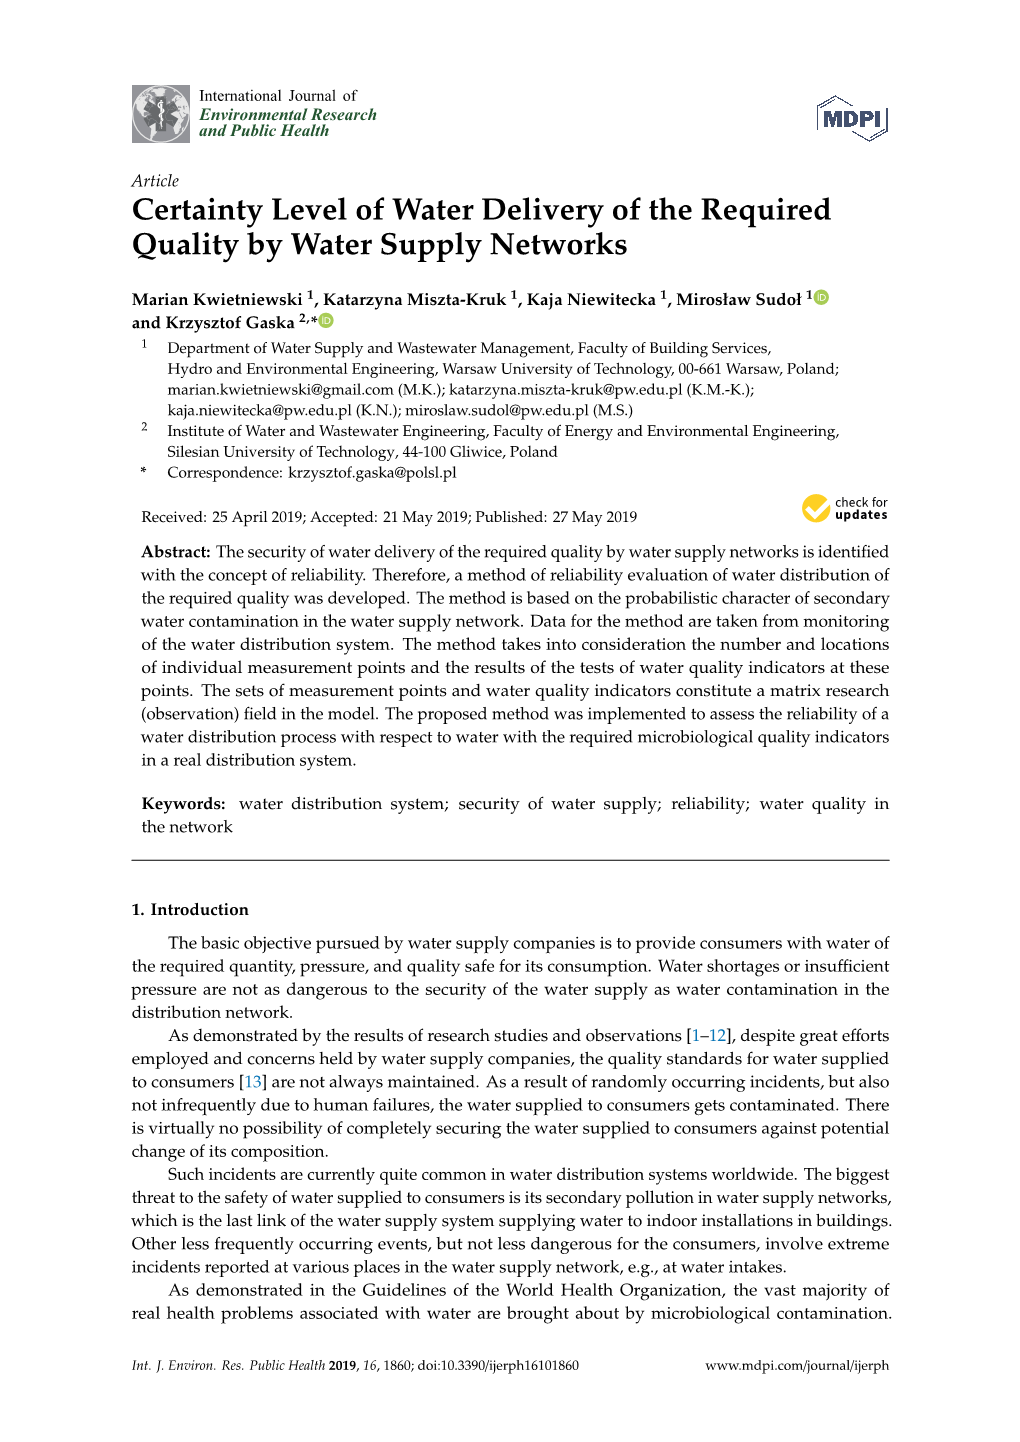 Certainty Level of Water Delivery of the Required Quality by Water Supply Networks